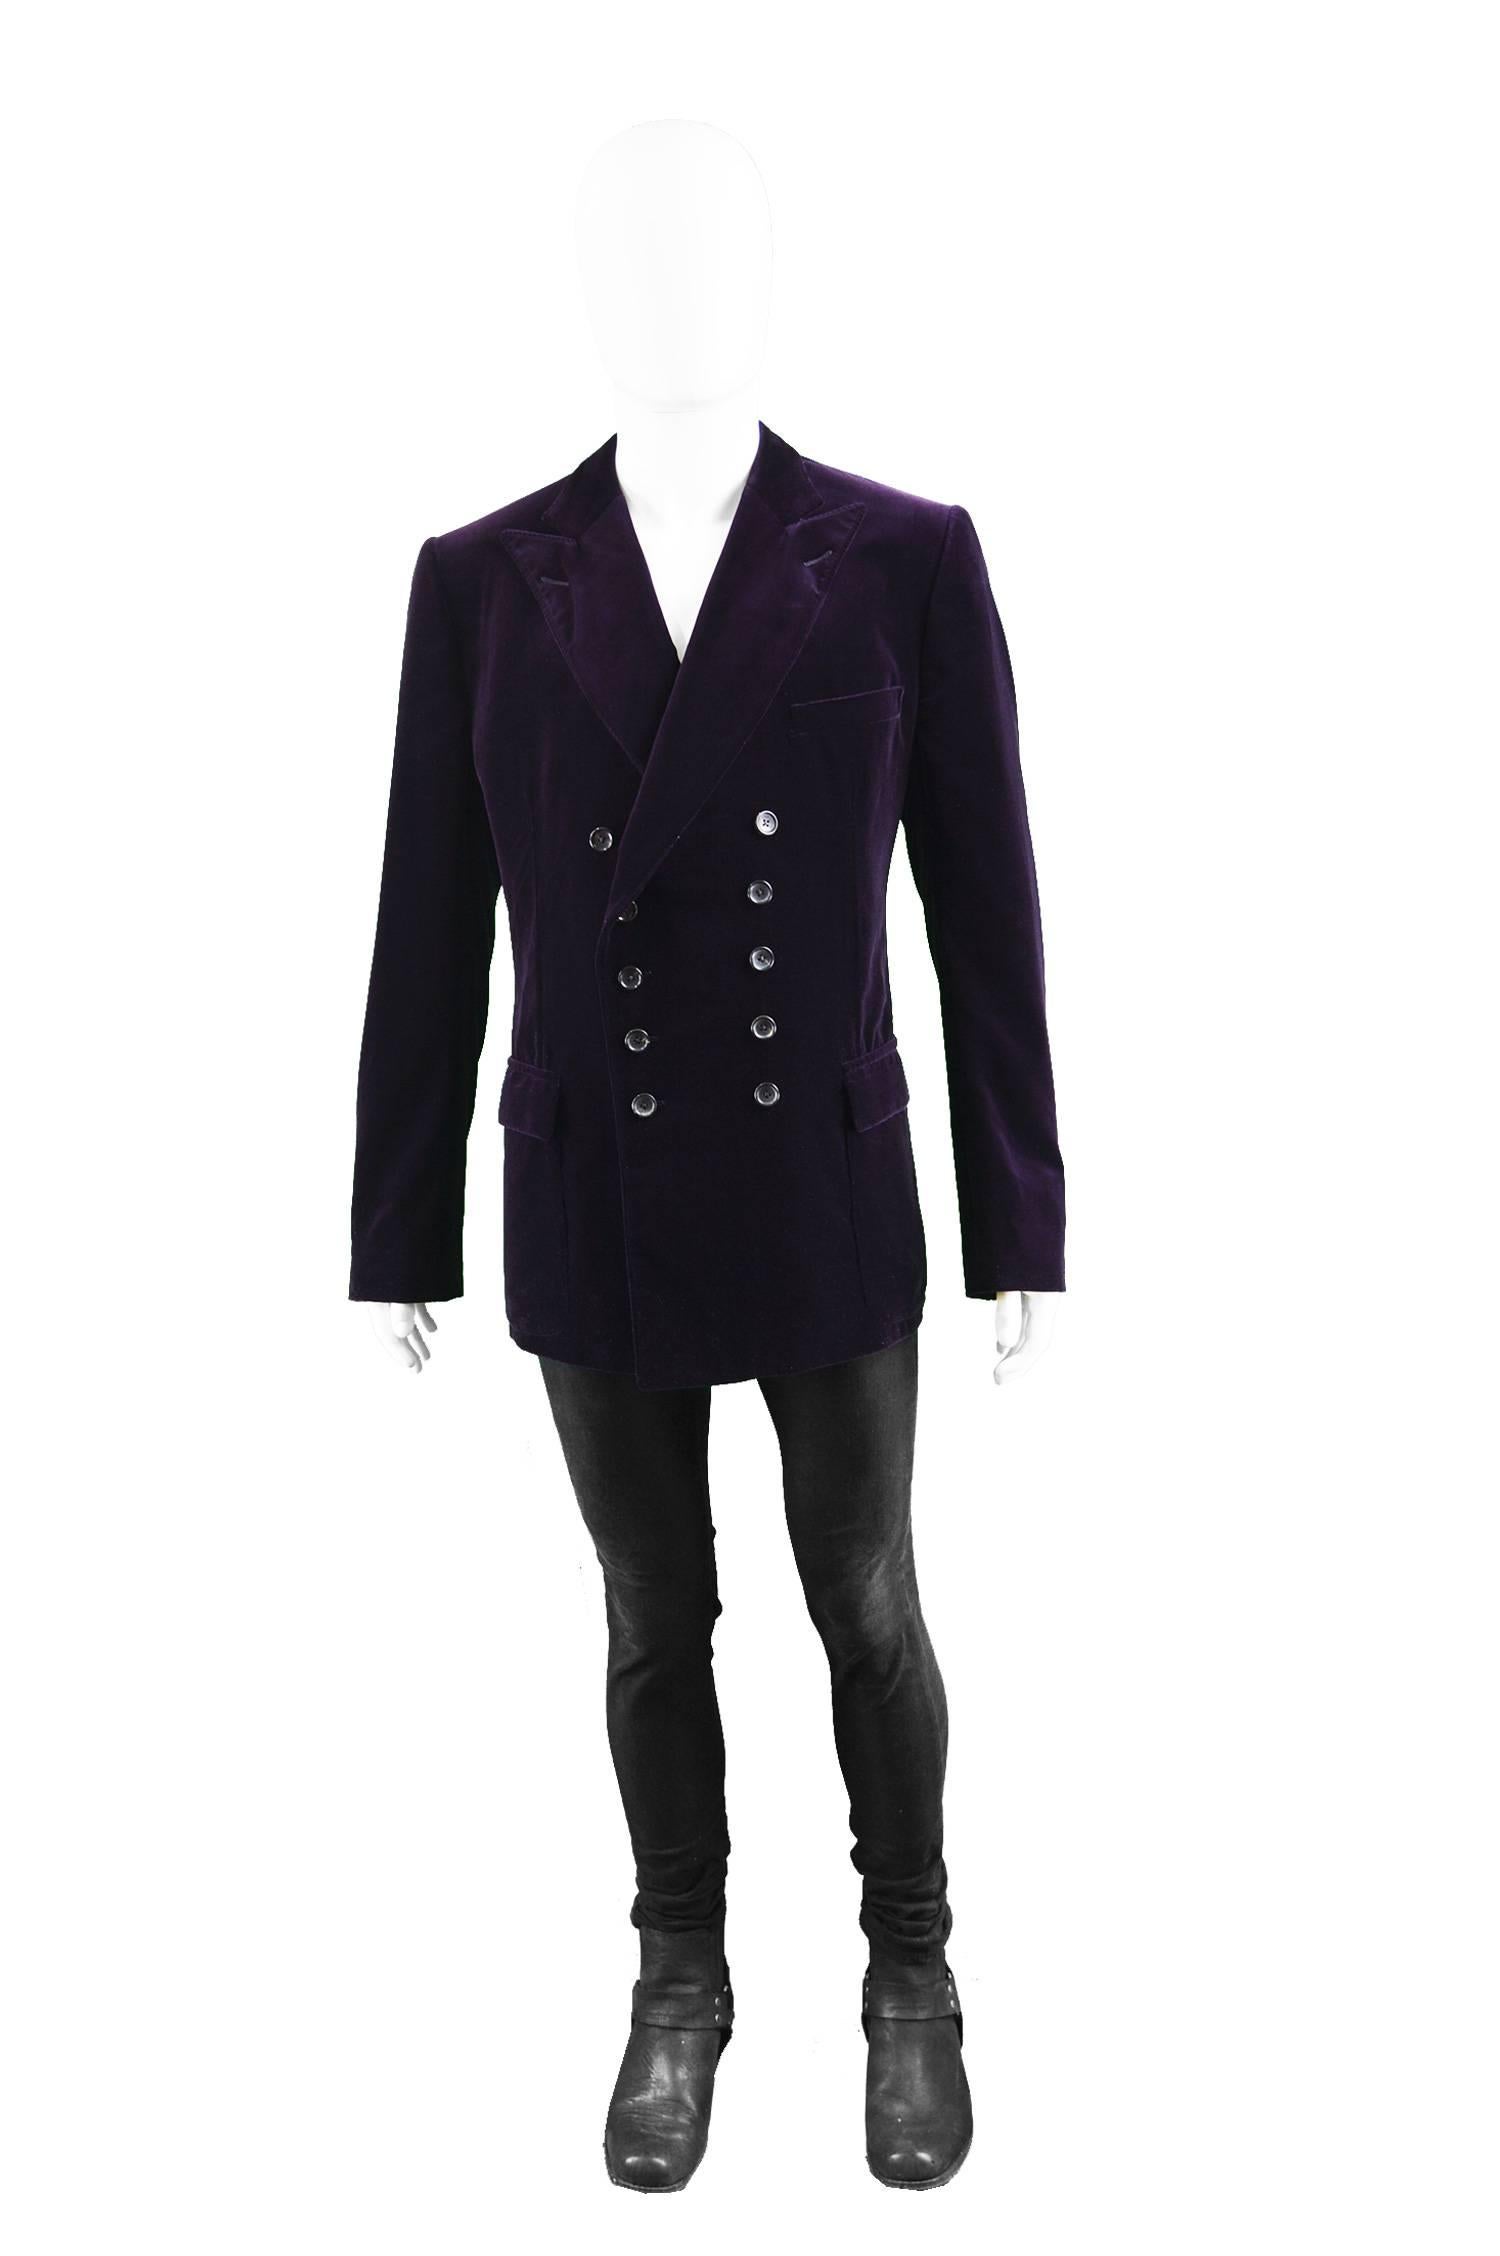 Gucci Men's Dark Purple Velvet  Double Breasted Peaked Lapels Dinner Jacket

Estimated Size: Unlabelled fits roughly like a Men’s Large. Please check all measurements
Chest - 44” / 106cm (allow a couple of inches room for movement)
Waist - 42” /